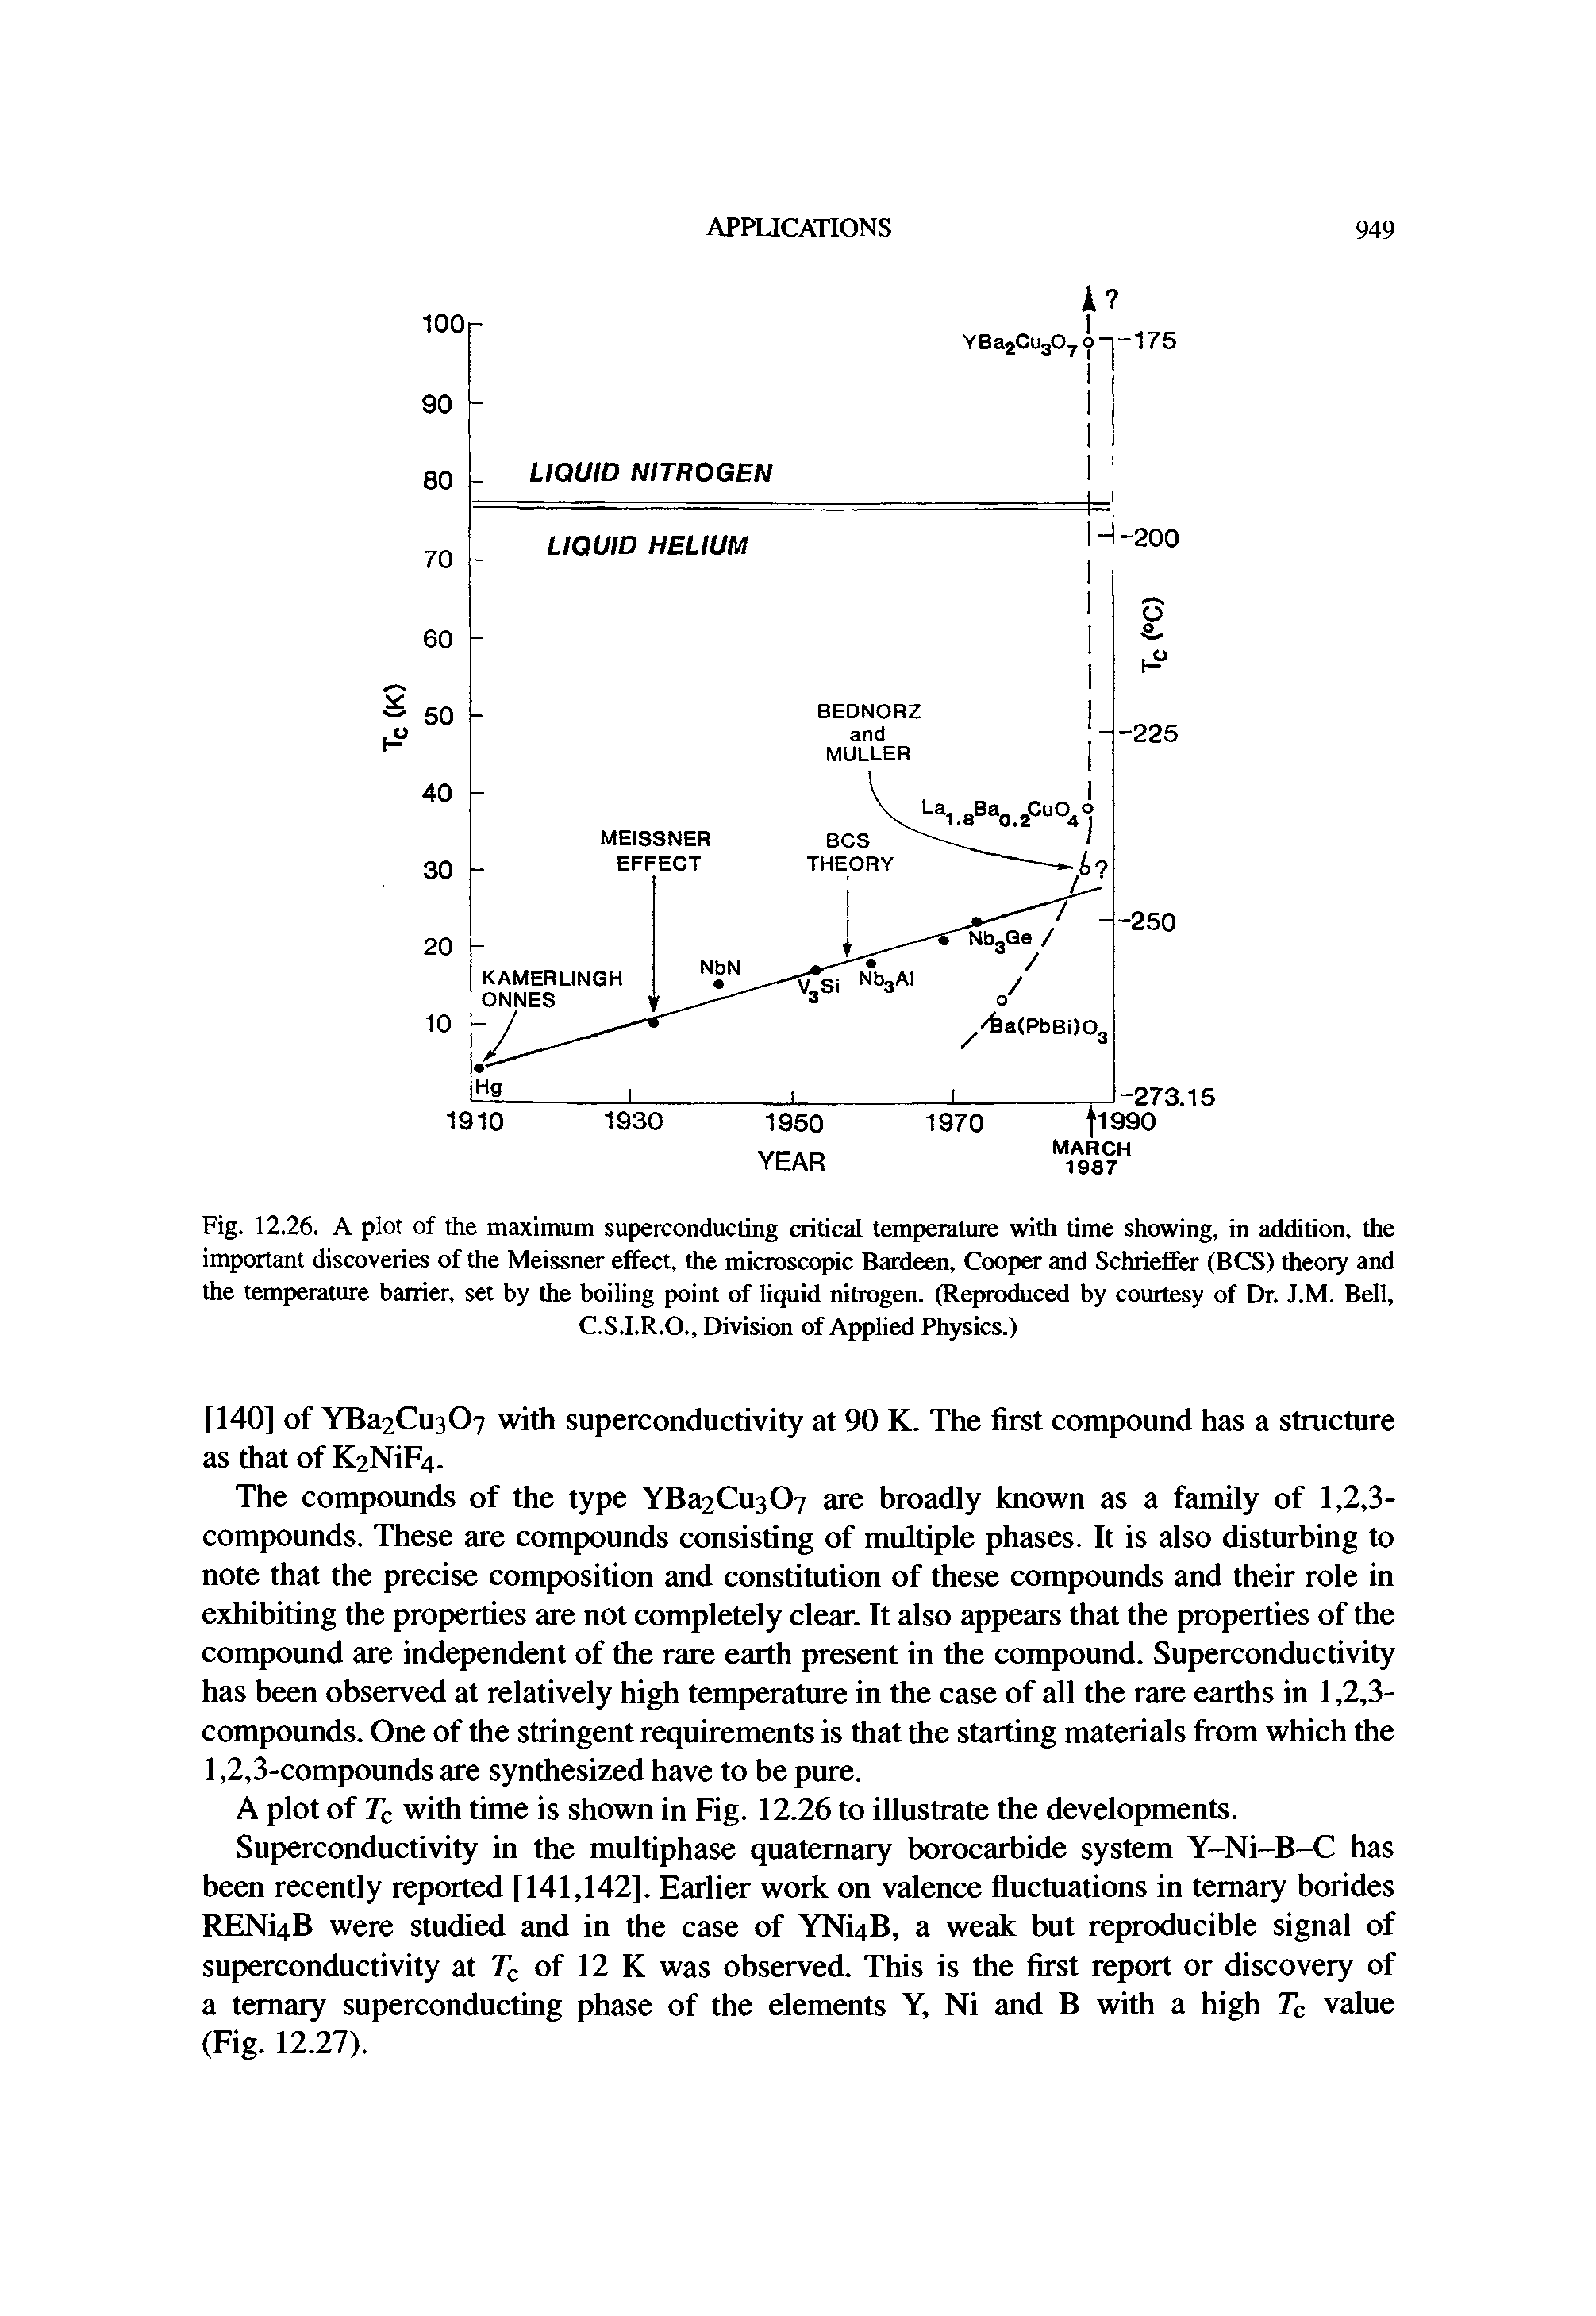 Fig. 12.26. A plot of the maximum superconducting critical temperature with time showing, in addition, the important discoveries of the Meissner effect, the microscopic Bardeen, Cooper and Schrieffer (BCS) theory and the temperature barrier, set by the boiling point of liquid nitrogen. (Reproduced by courtesy of Dr. J.M. Bell,...